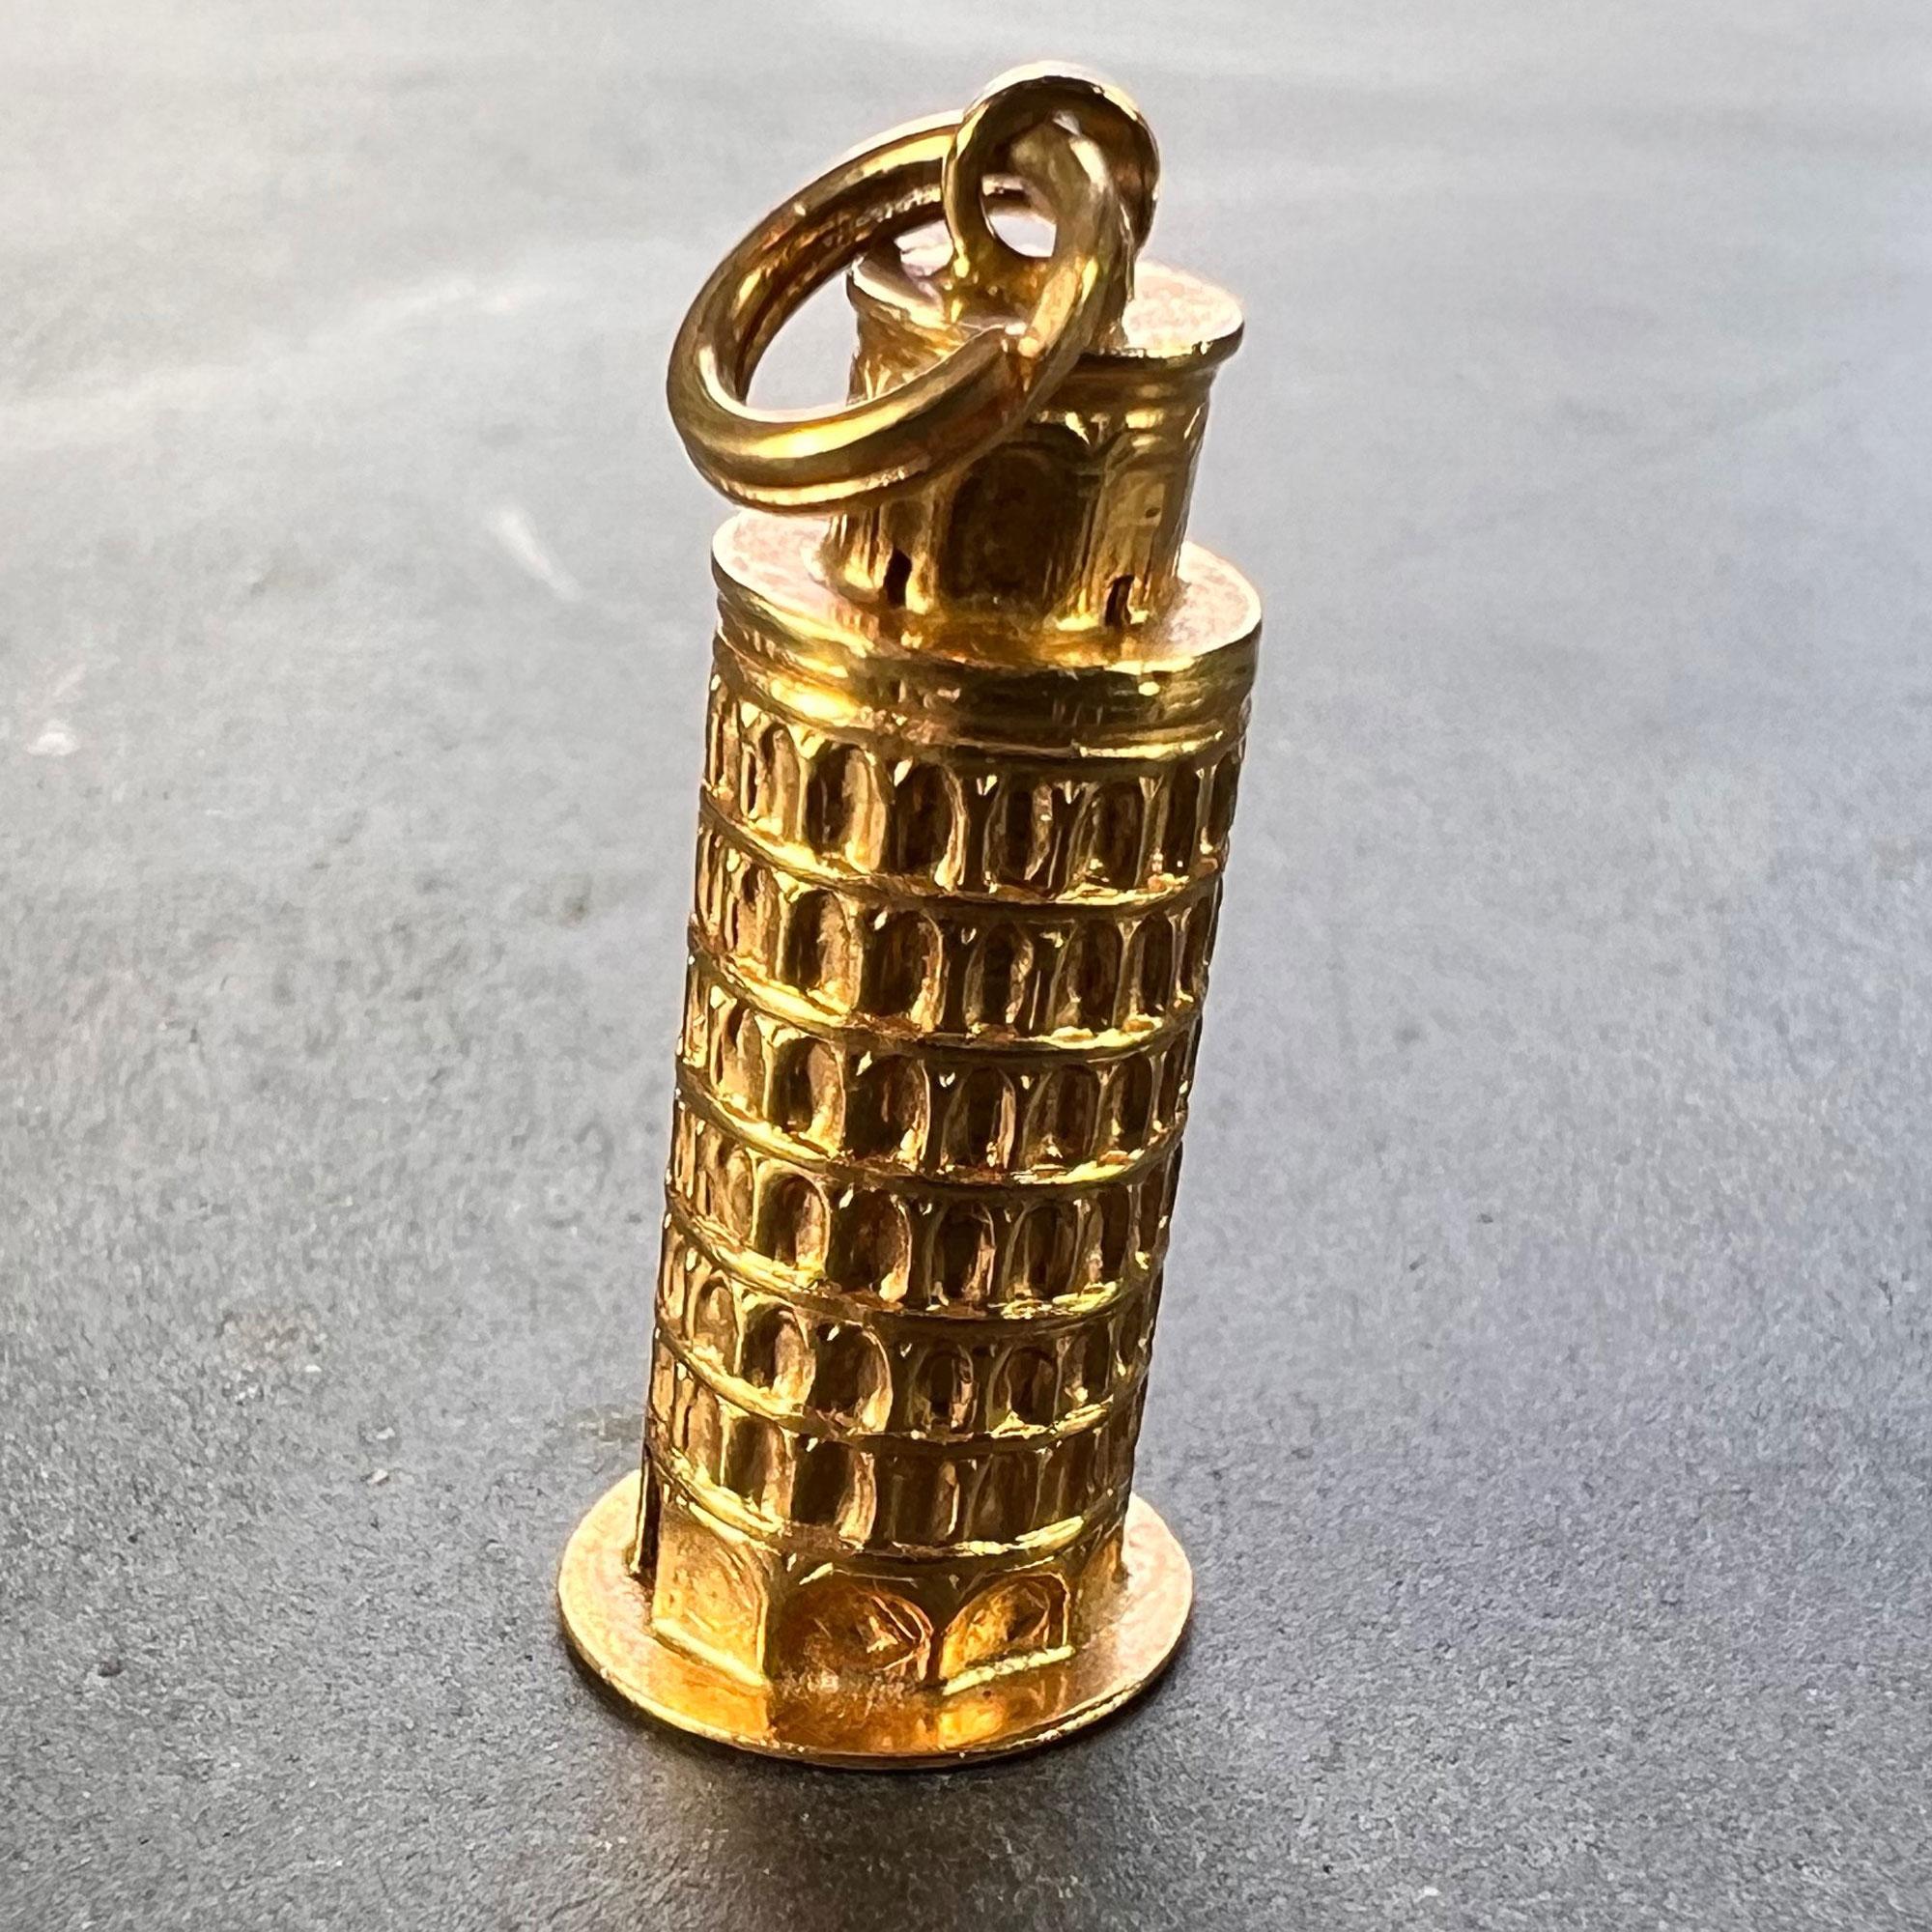 Italian Leaning Tower of Pisa 18K Yellow Gold Charm Pendant In Good Condition For Sale In London, GB